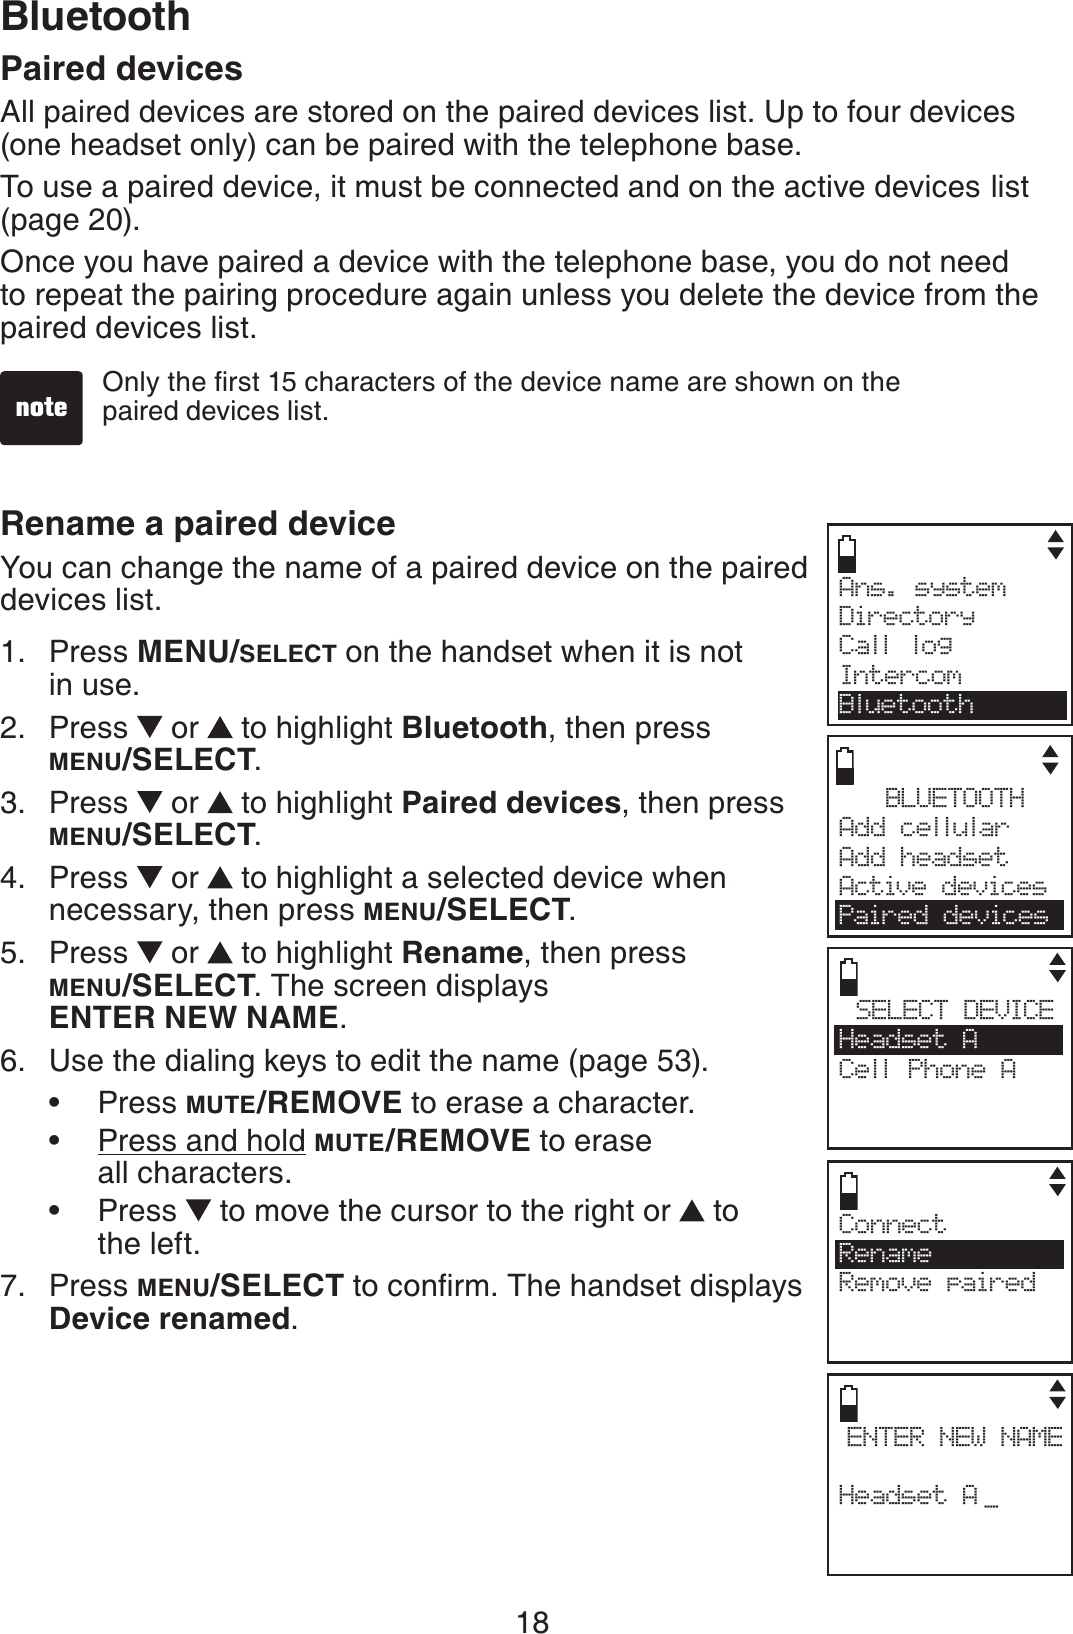 18BluetoothPaired devicesAll paired devices are stored on the paired devices list. Up to four devices (one headset only) can be paired with the telephone base.To use a paired device, it must be connected and on the active devices list (page 20).Once you have paired a device with the telephone base, you do not need to repeat the pairing procedure again unless you delete the device from the paired devices list.Rename a paired deviceYou can change the name of a paired device on the paired devices list.Press MENU/SELECT on the handset when it is not in use.Press   or  to highlight Bluetooth, then press MENU/SELECT.Press   or  to highlight Paired devices, then press MENU/SELECT.Press   or  to highlight a selected device when necessary, then press MENU/SELECT.Press   or  to highlight Rename, then press MENU/SELECT. The screen displays ENTER NEW NAME.Use the dialing keys to edit the name (page 53).Press MUTE/REMOVE to erase a character.Press and hold MUTE/REMOVE to erase all characters.Press   to move the cursor to the right or  to the left.Press MENU/SELECTVQEQPſTO6JGJCPFUGVFKURNC[UDevice renamed.1.2.3.4.5.6.•••7.1PN[VJGſTUVEJCTCEVGTUQHVJGFGXKEGPCOGCTGUJQYPQPVJGpaired devices list.Ans. system     Directory Call logIntercomBluetoothBLUETOOTHAdd cellular Add headsetActive devicesPaired devicesSELECT DEVICEHeadset ACell Phone ACENTER NEW NAMEHeadset A _ConnectRenameRemove paired